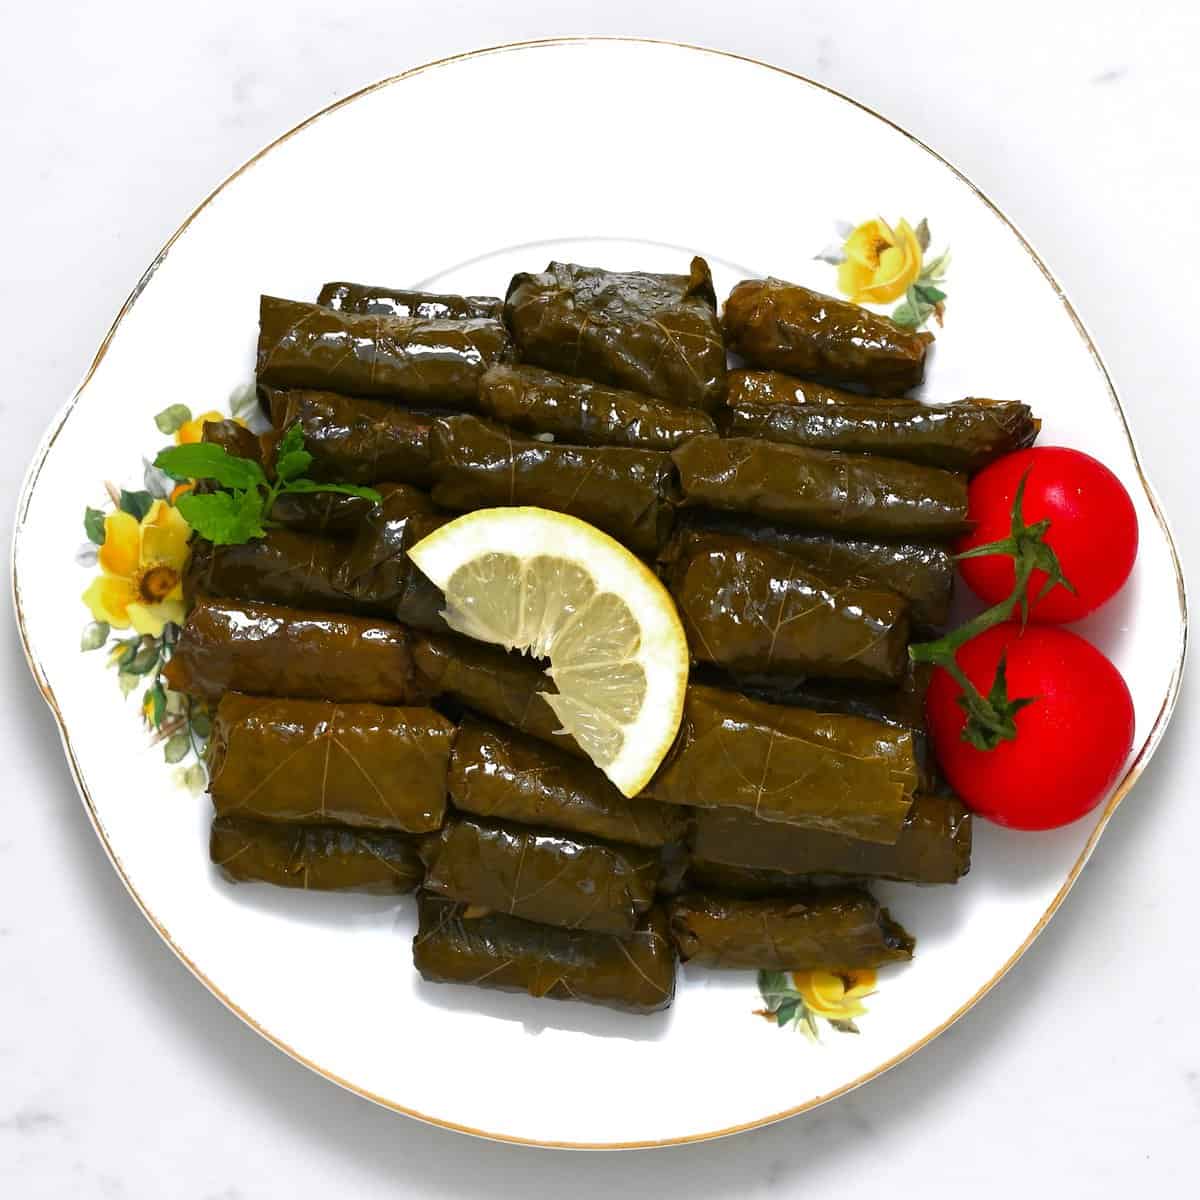 A serving of dolmas with tomatoes and lemon slice